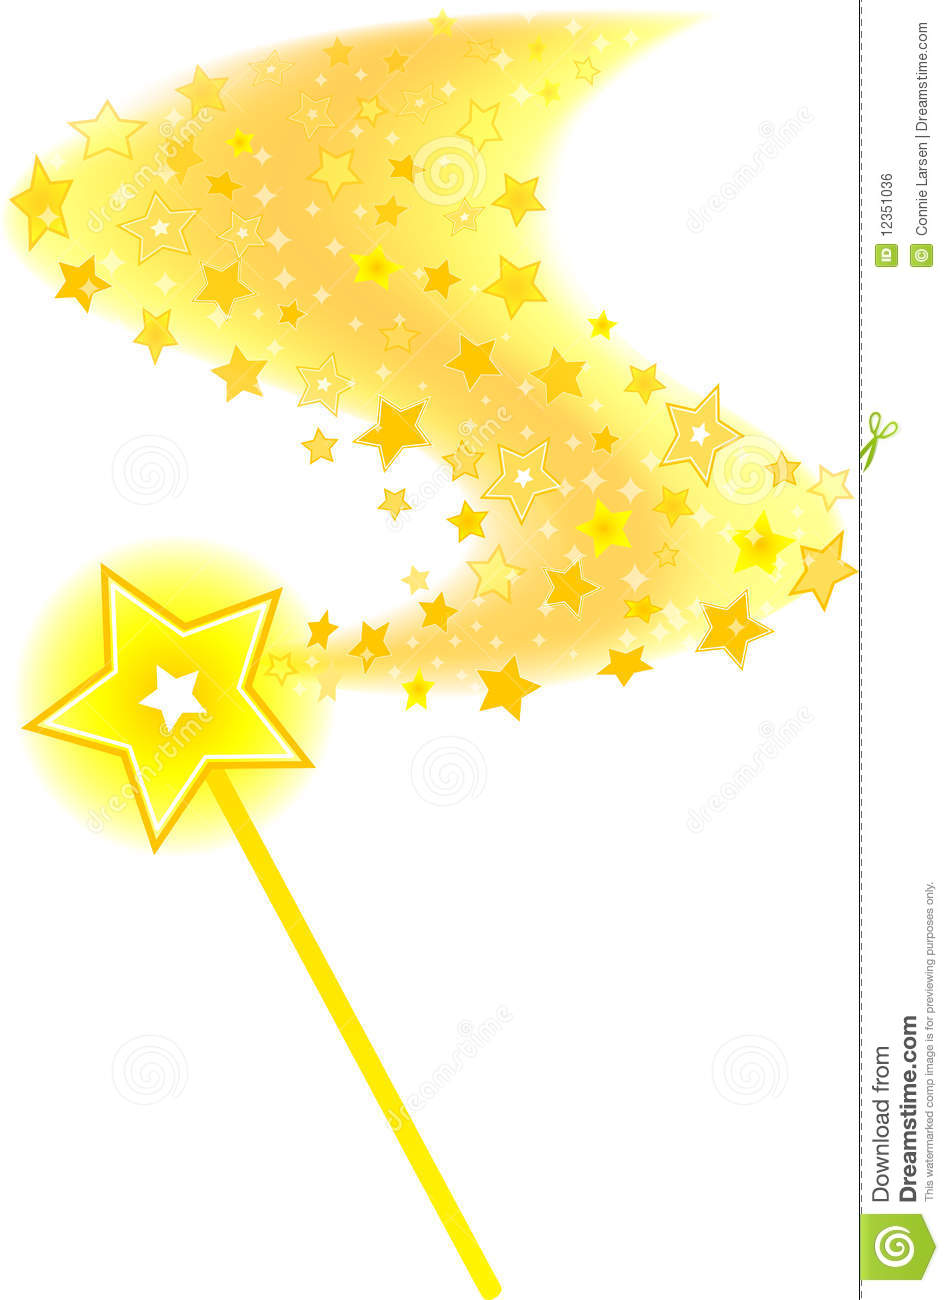 Illustration Of A Golden Magic Wand With A Sparkly Goldenl Star Trail